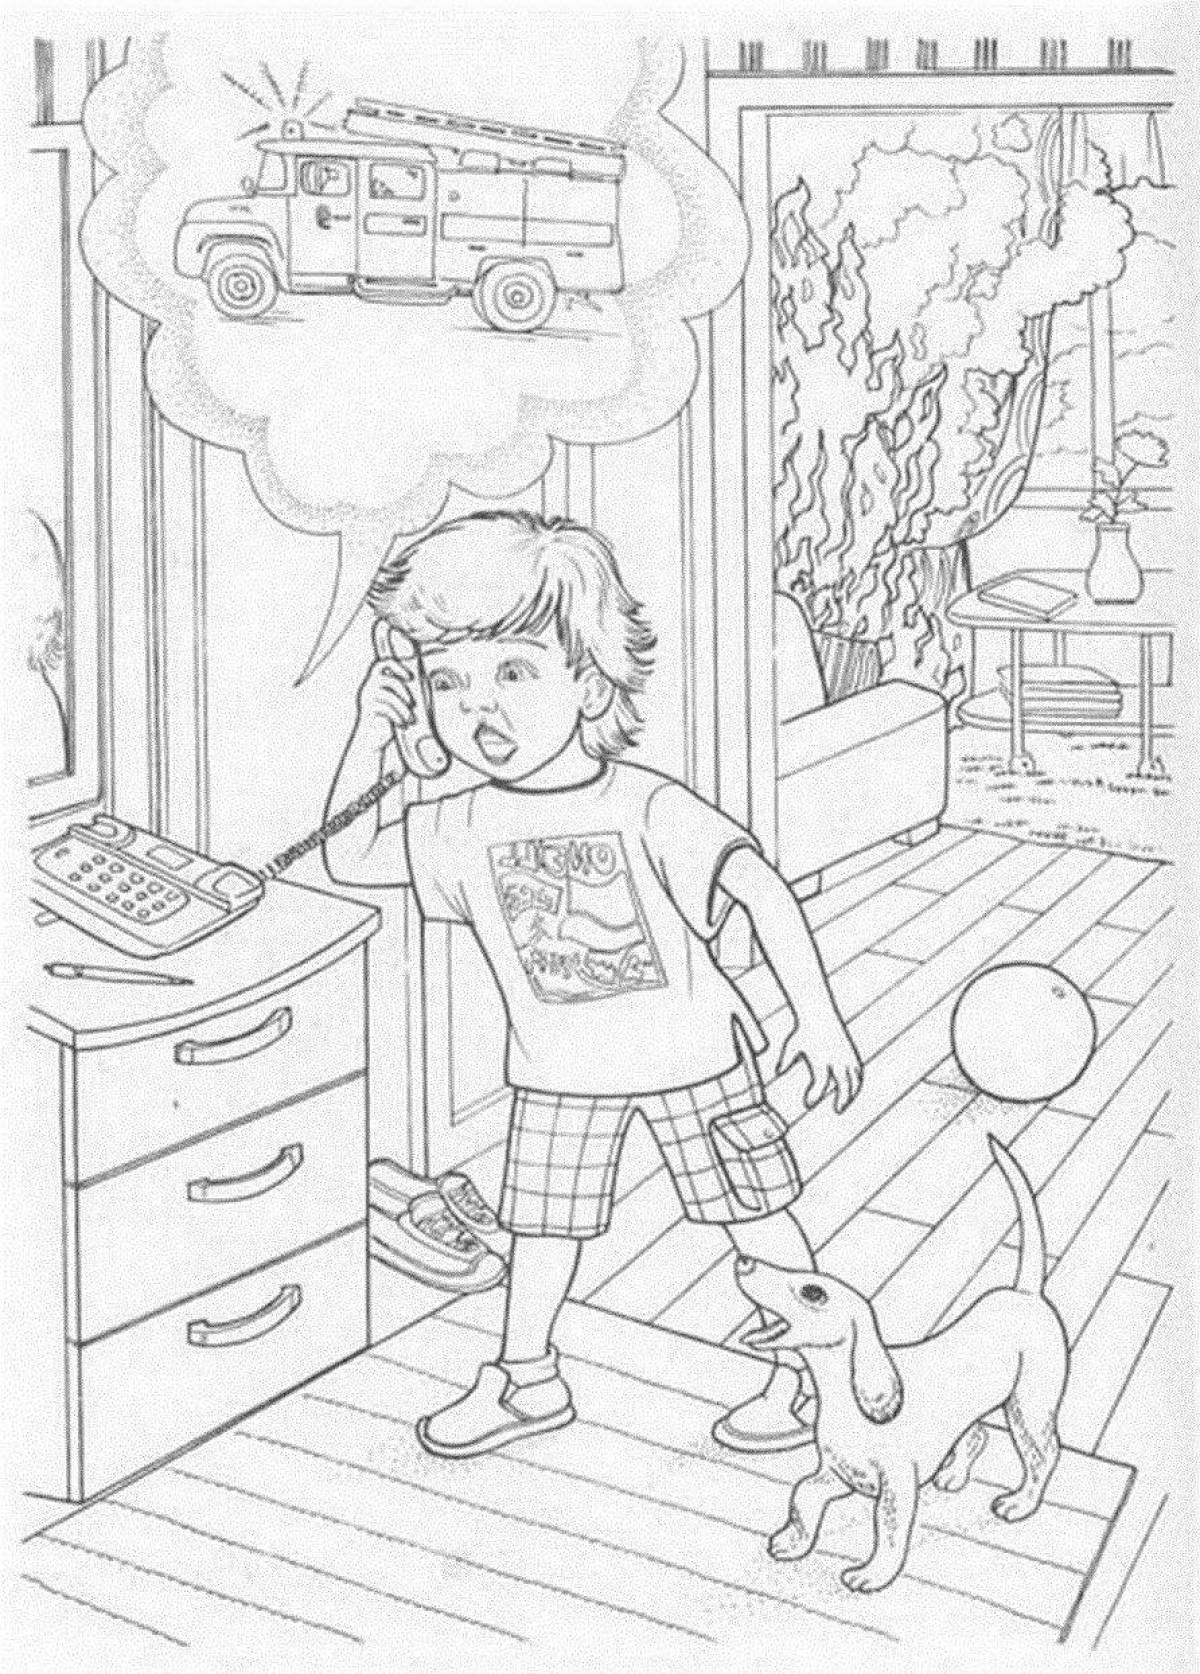 Coloring book hypnotic fire safety for kindergarten